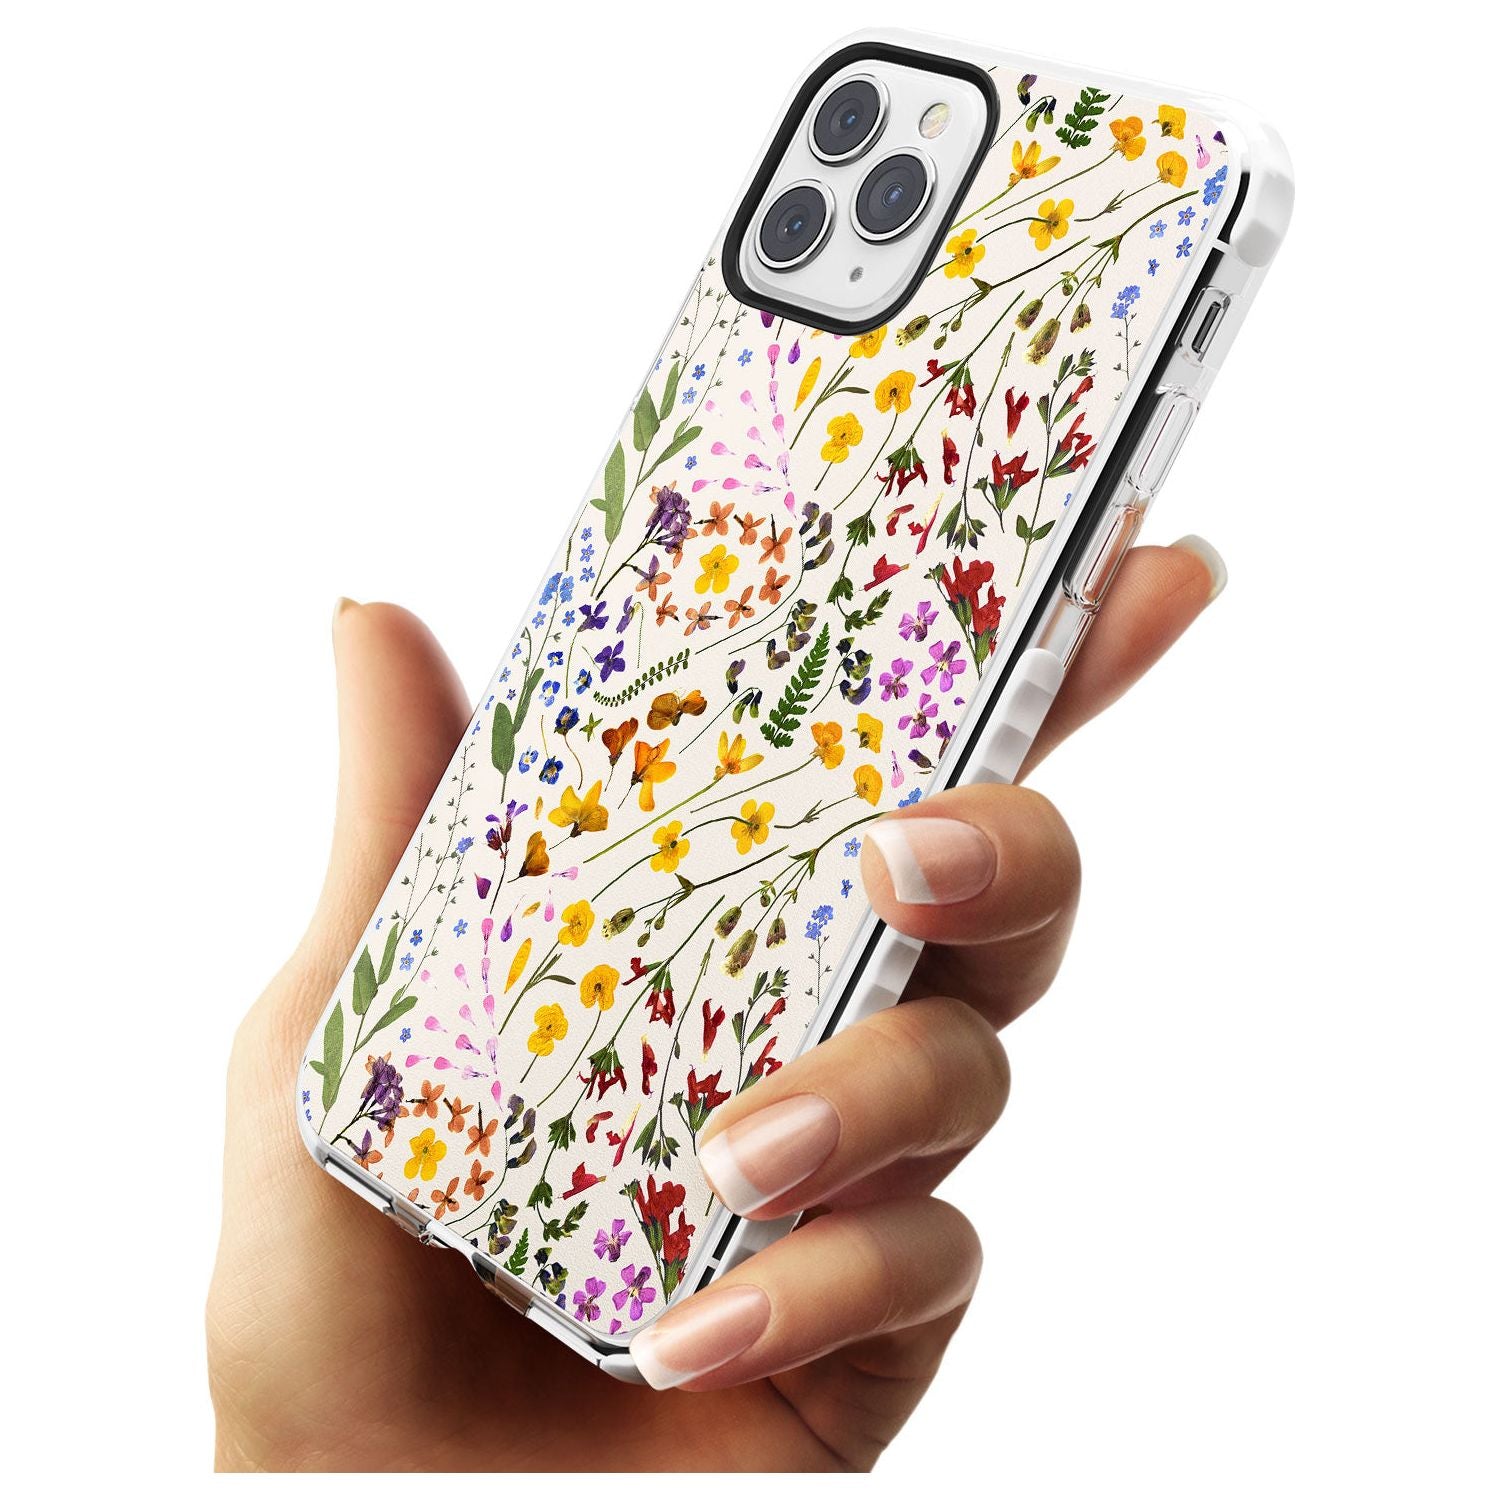 Wildflower & Leaves Cluster Design - Cream Impact Phone Case for iPhone 11 Pro Max